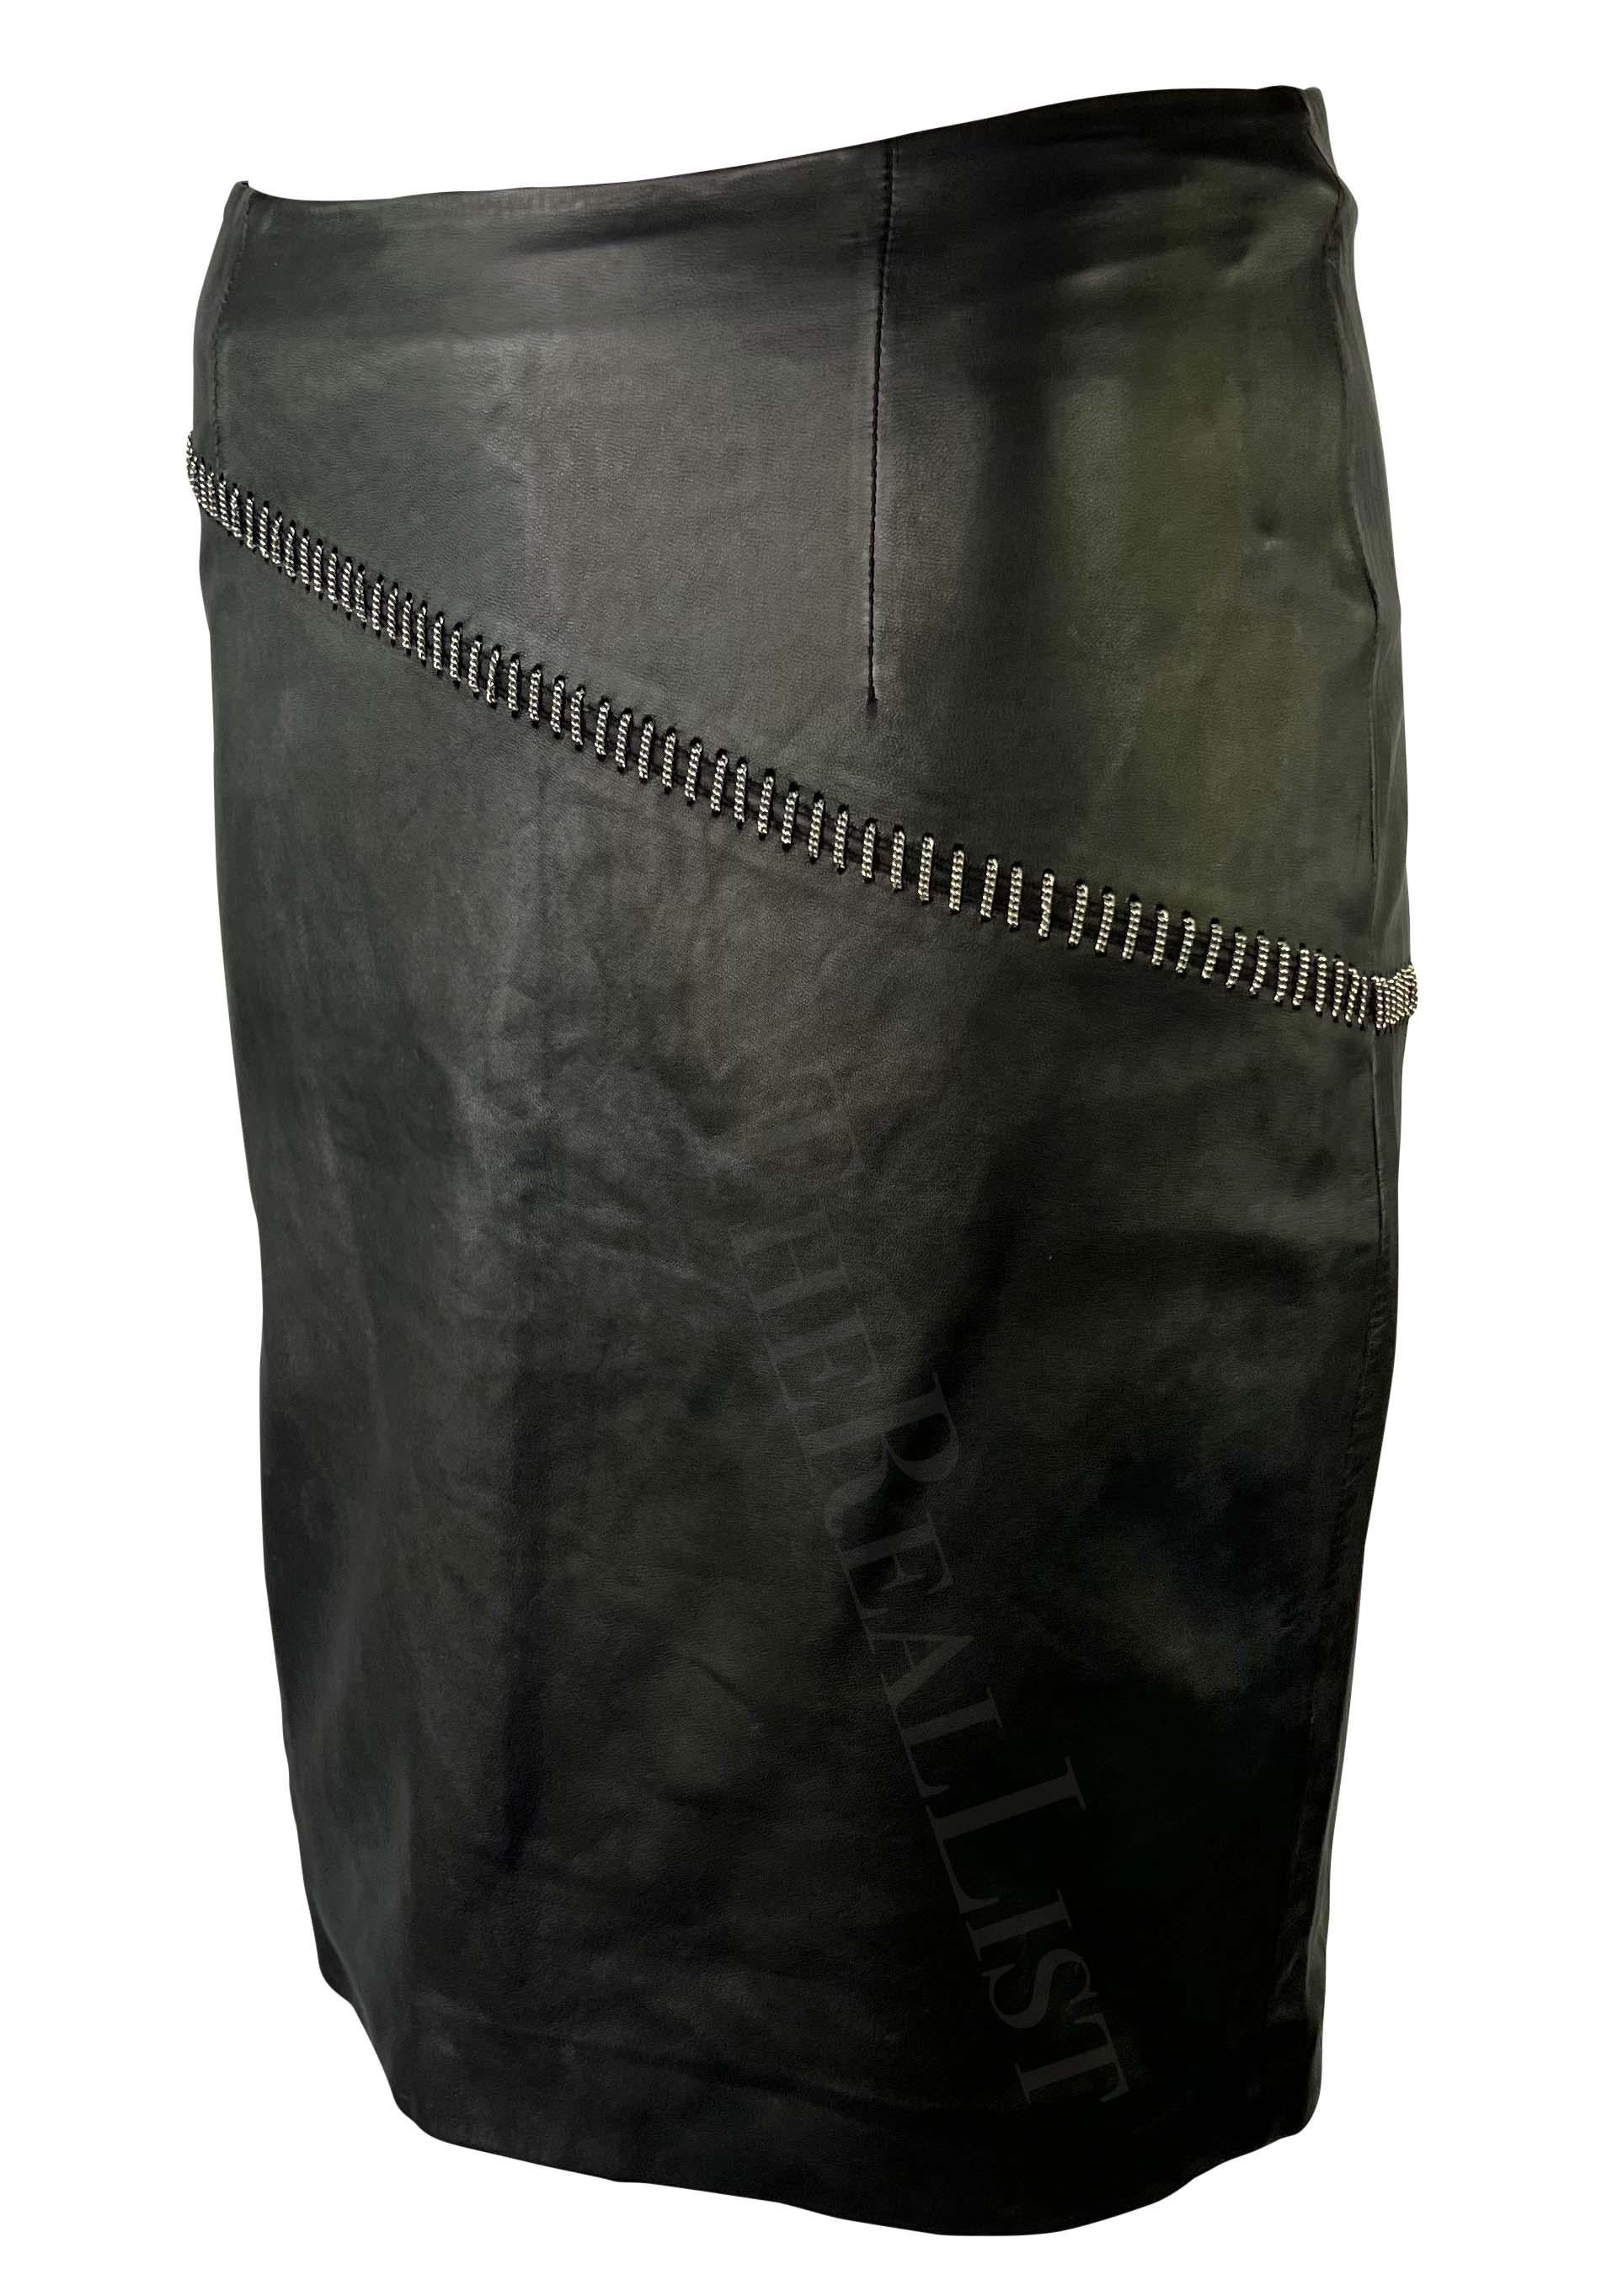 S/S 1999 Gianni Versace by Donatella Black Leather Silver Chain Mini Skirt In Good Condition For Sale In West Hollywood, CA